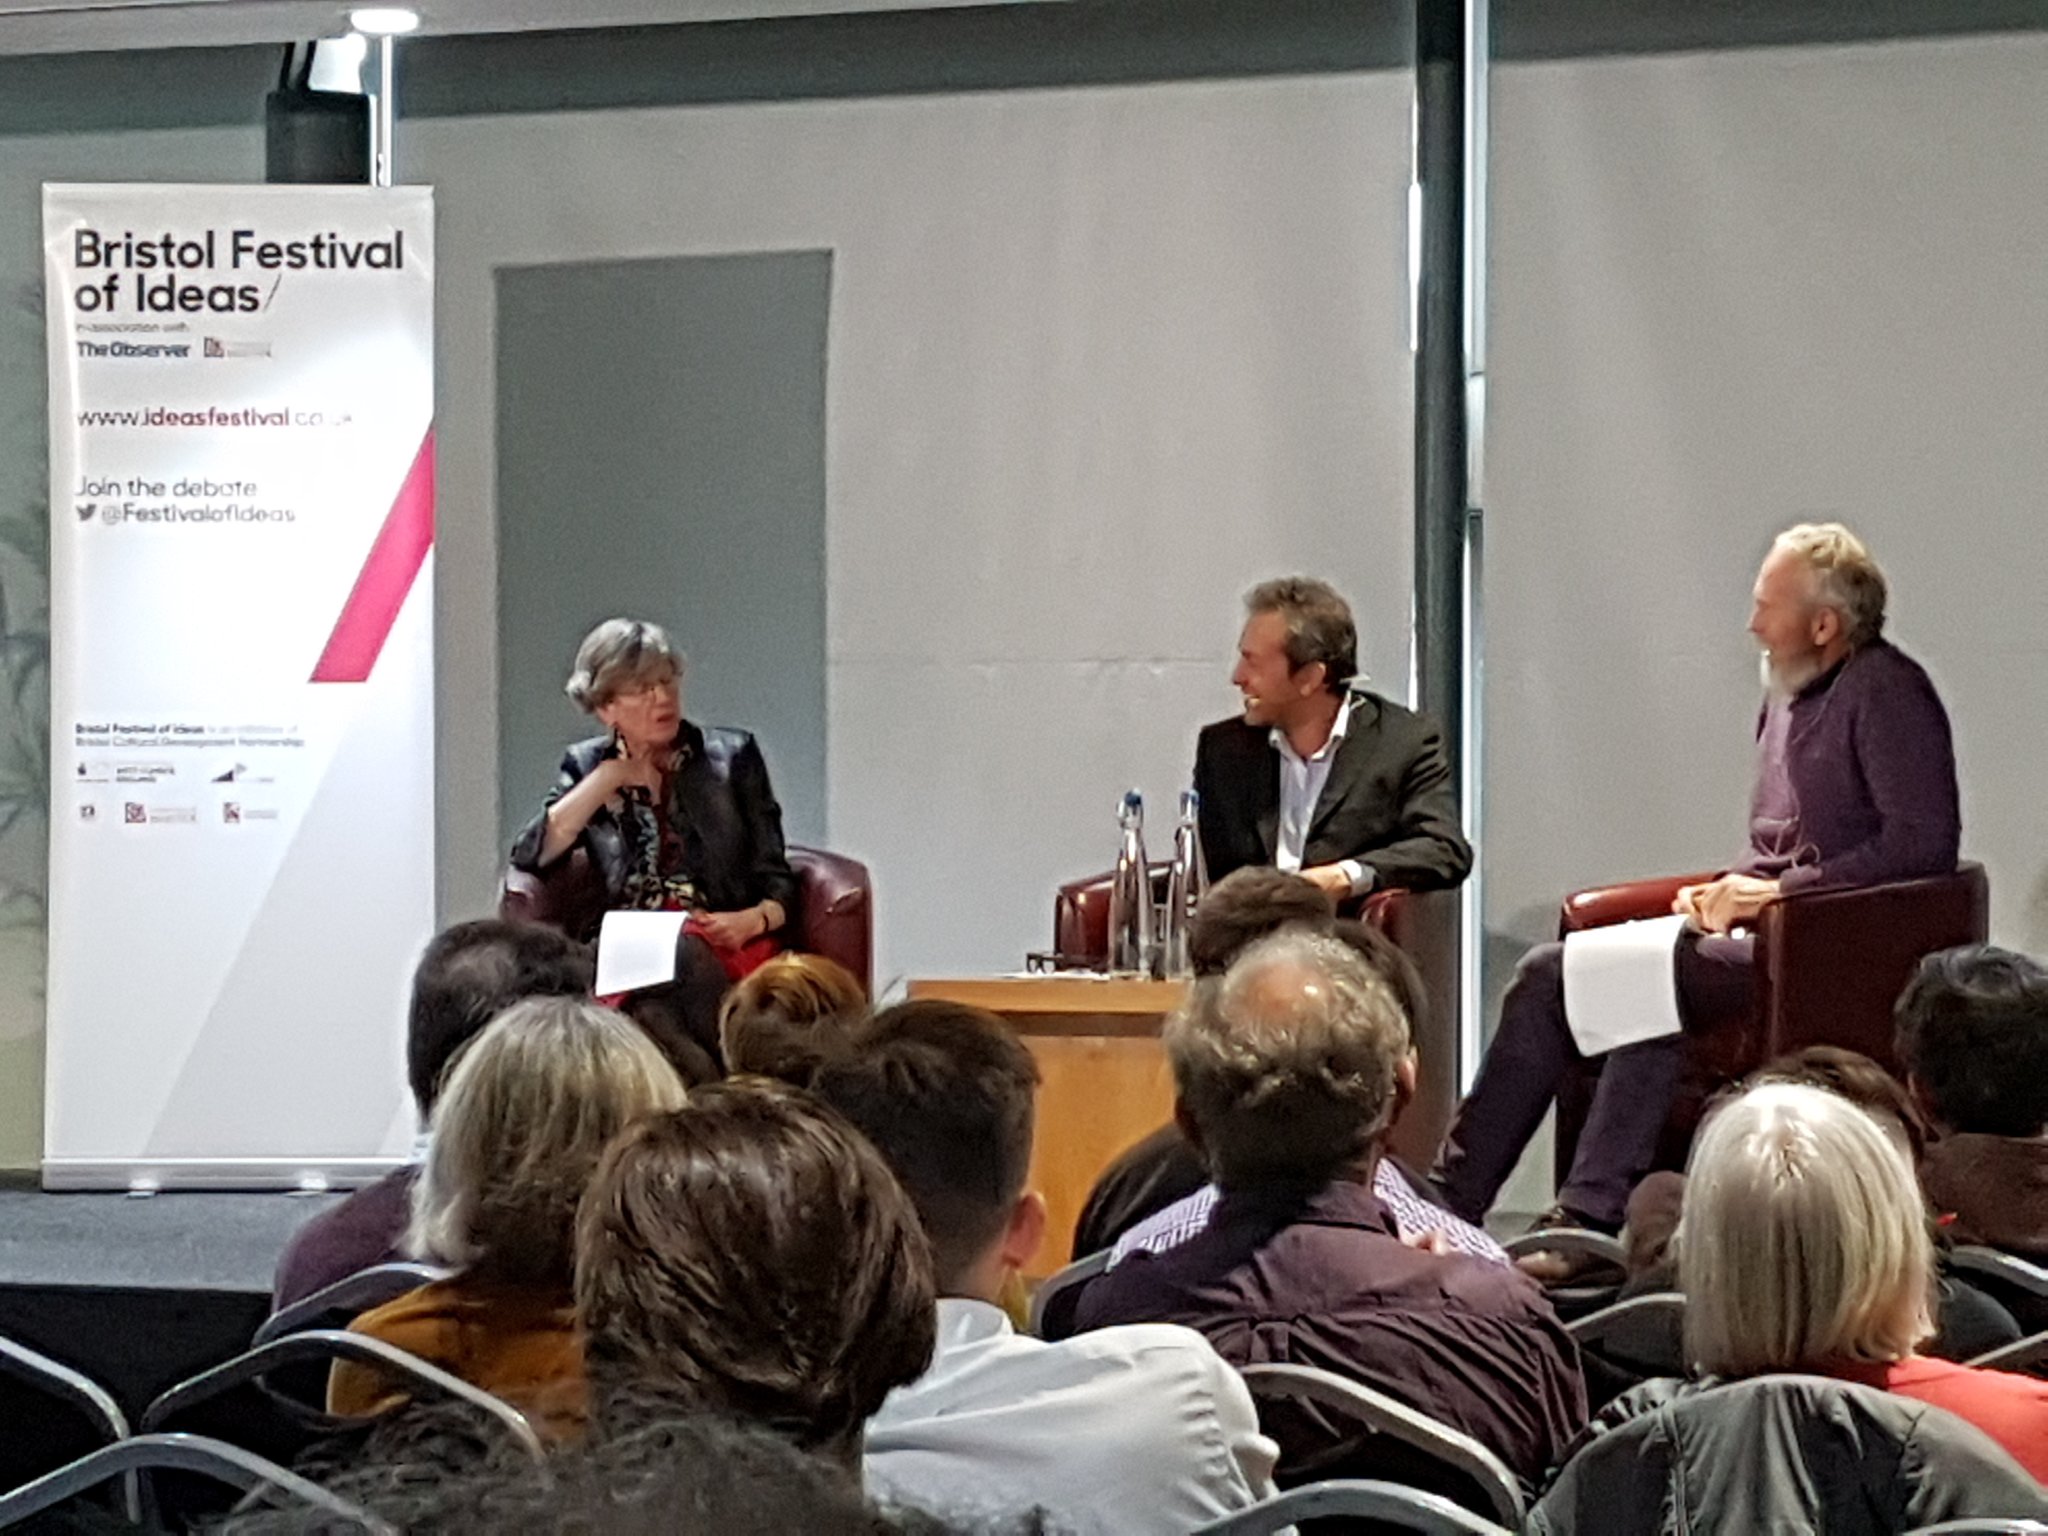 Catherine Mann and Doyne Farmer debate using complexity analysis to inform policy. #economicsfest https://t.co/8yp73SnVOA